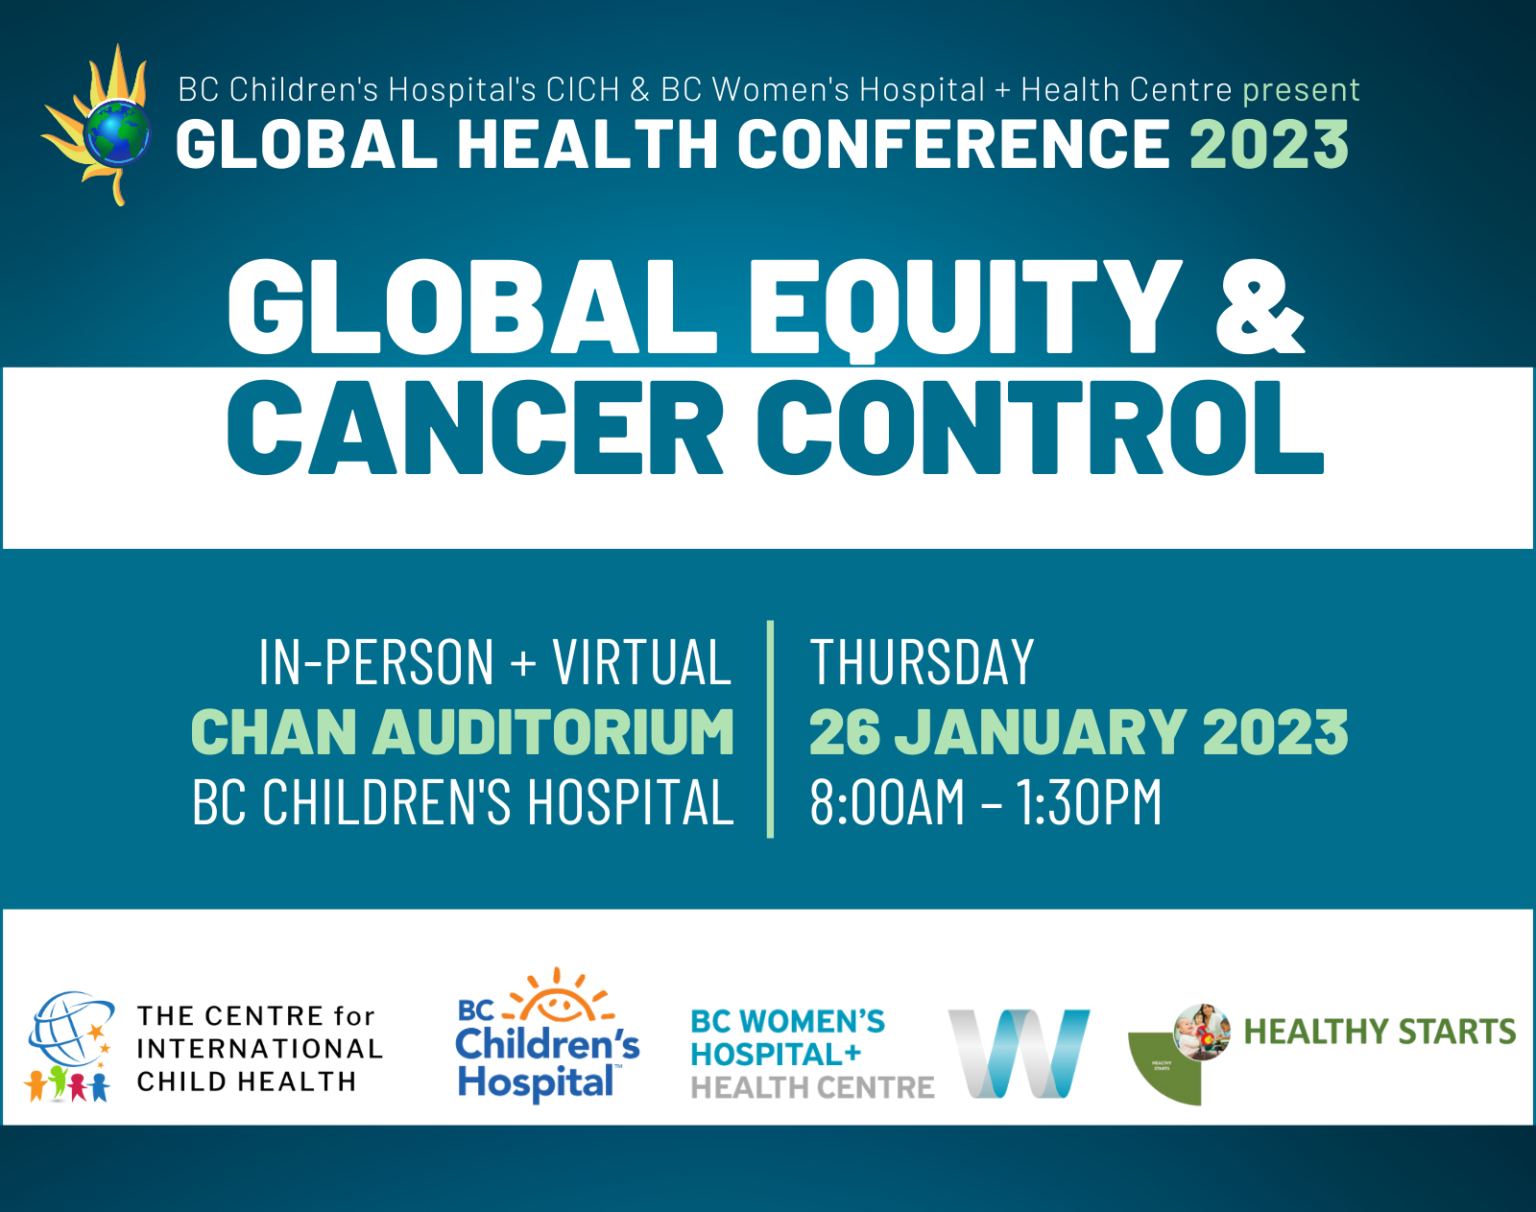 Global Health Conference 2023 UBCevents